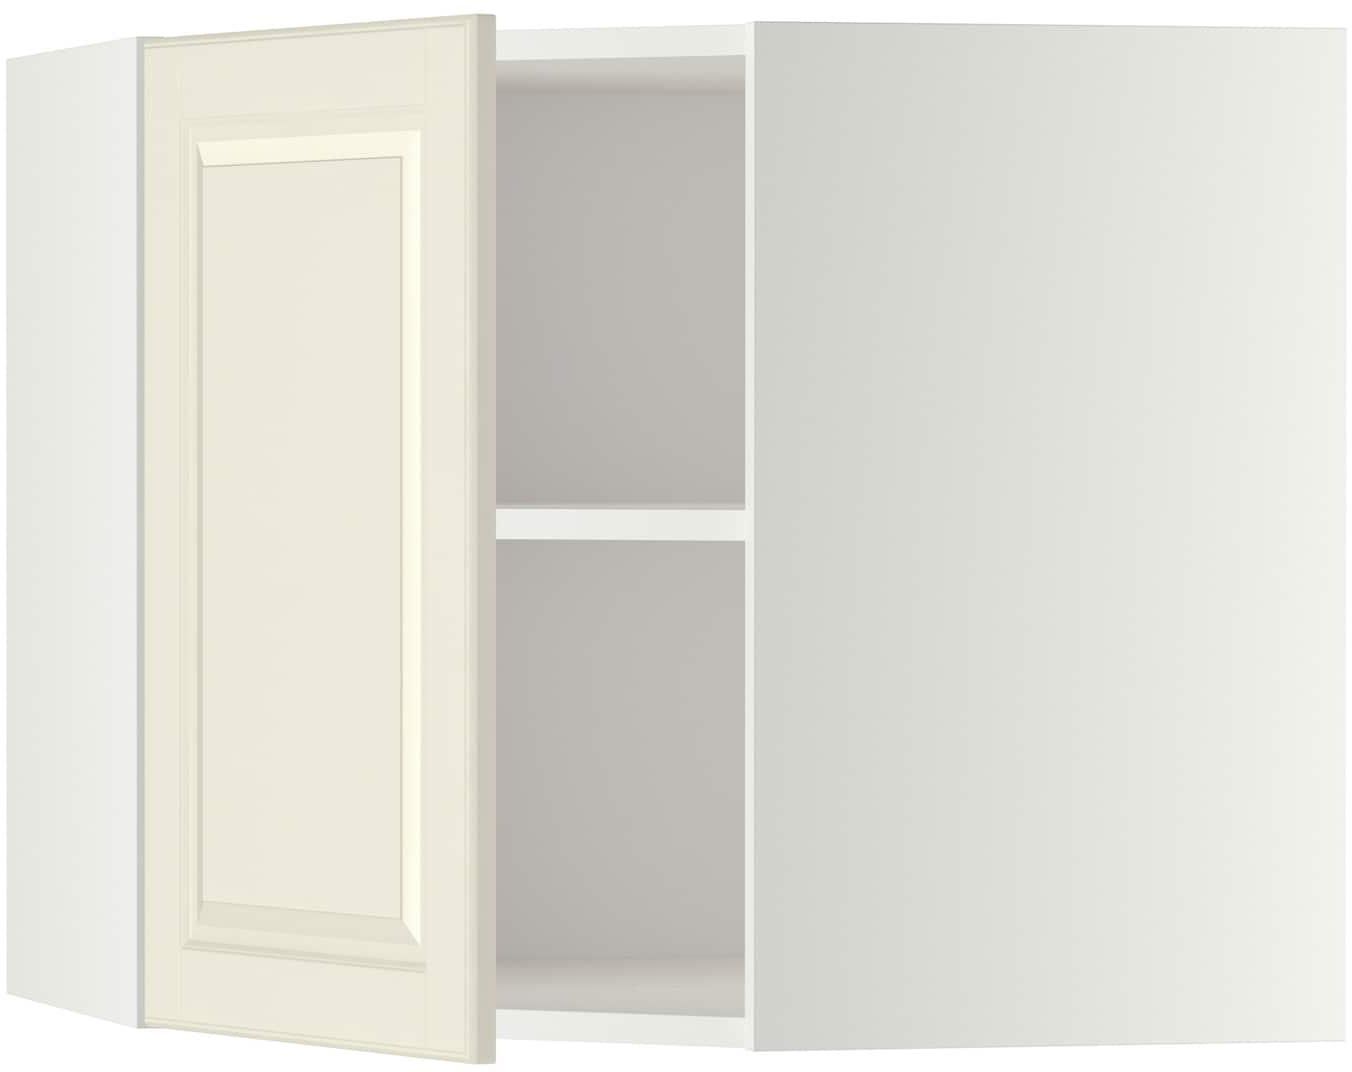 METOD Corner wall cabinet with shelves - white/Bodbyn off-white 68x60 cm